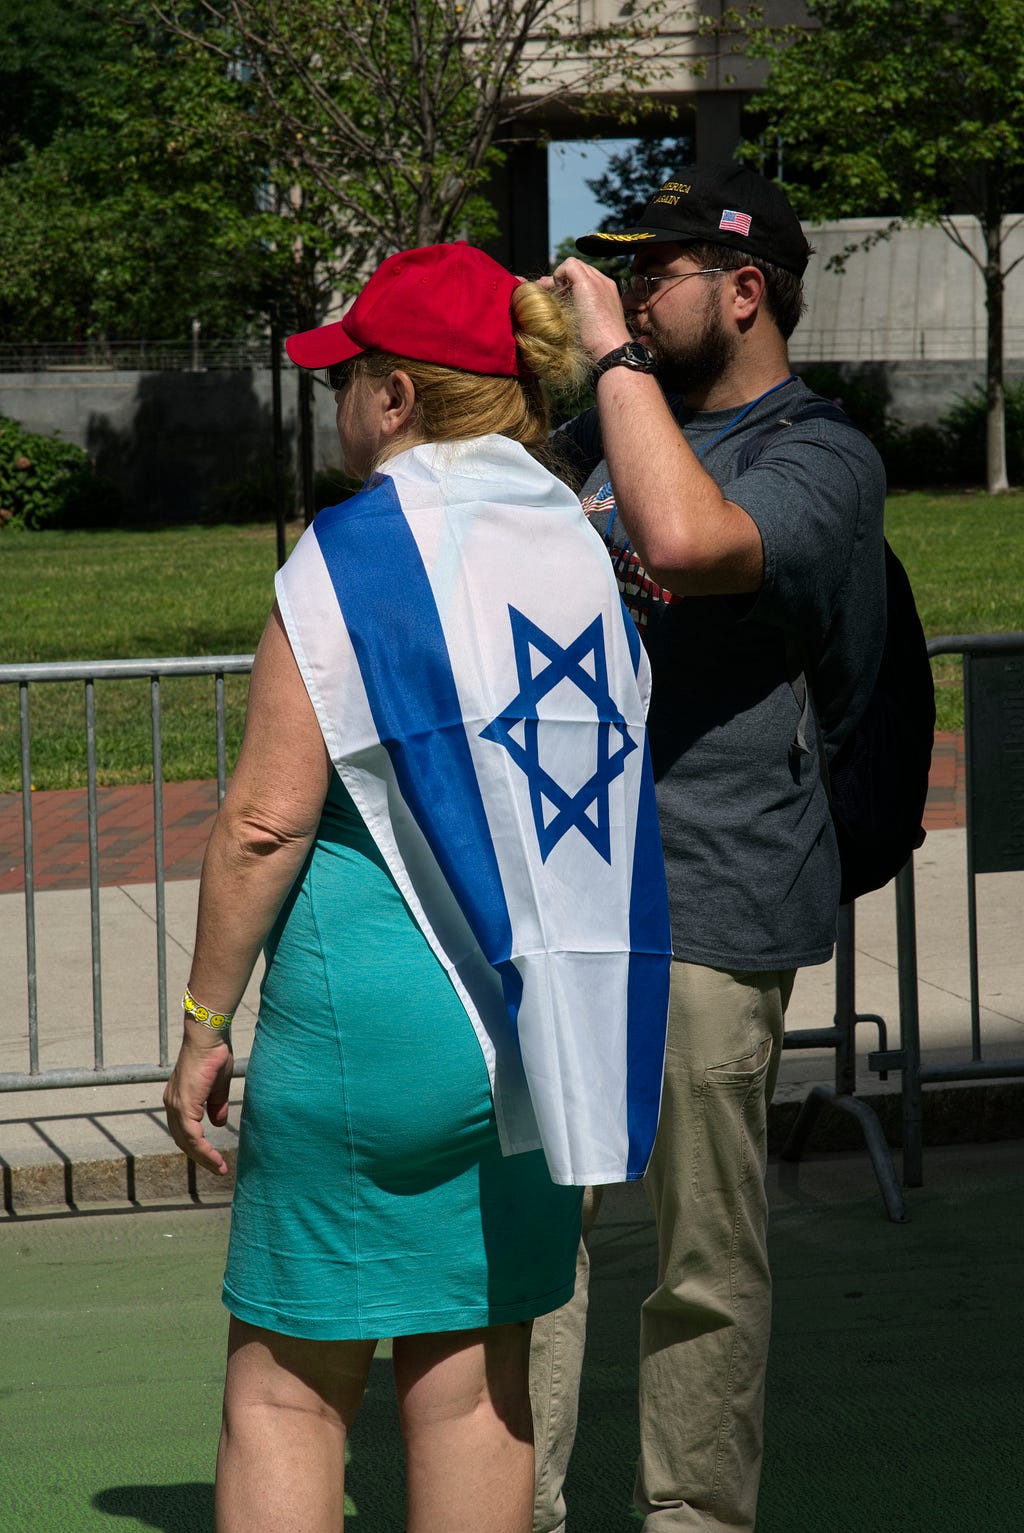 This Israeli-flag draped woman was the gatekeeper at one entrance to the barricaded Straight Pride rally on City Hall plaza.